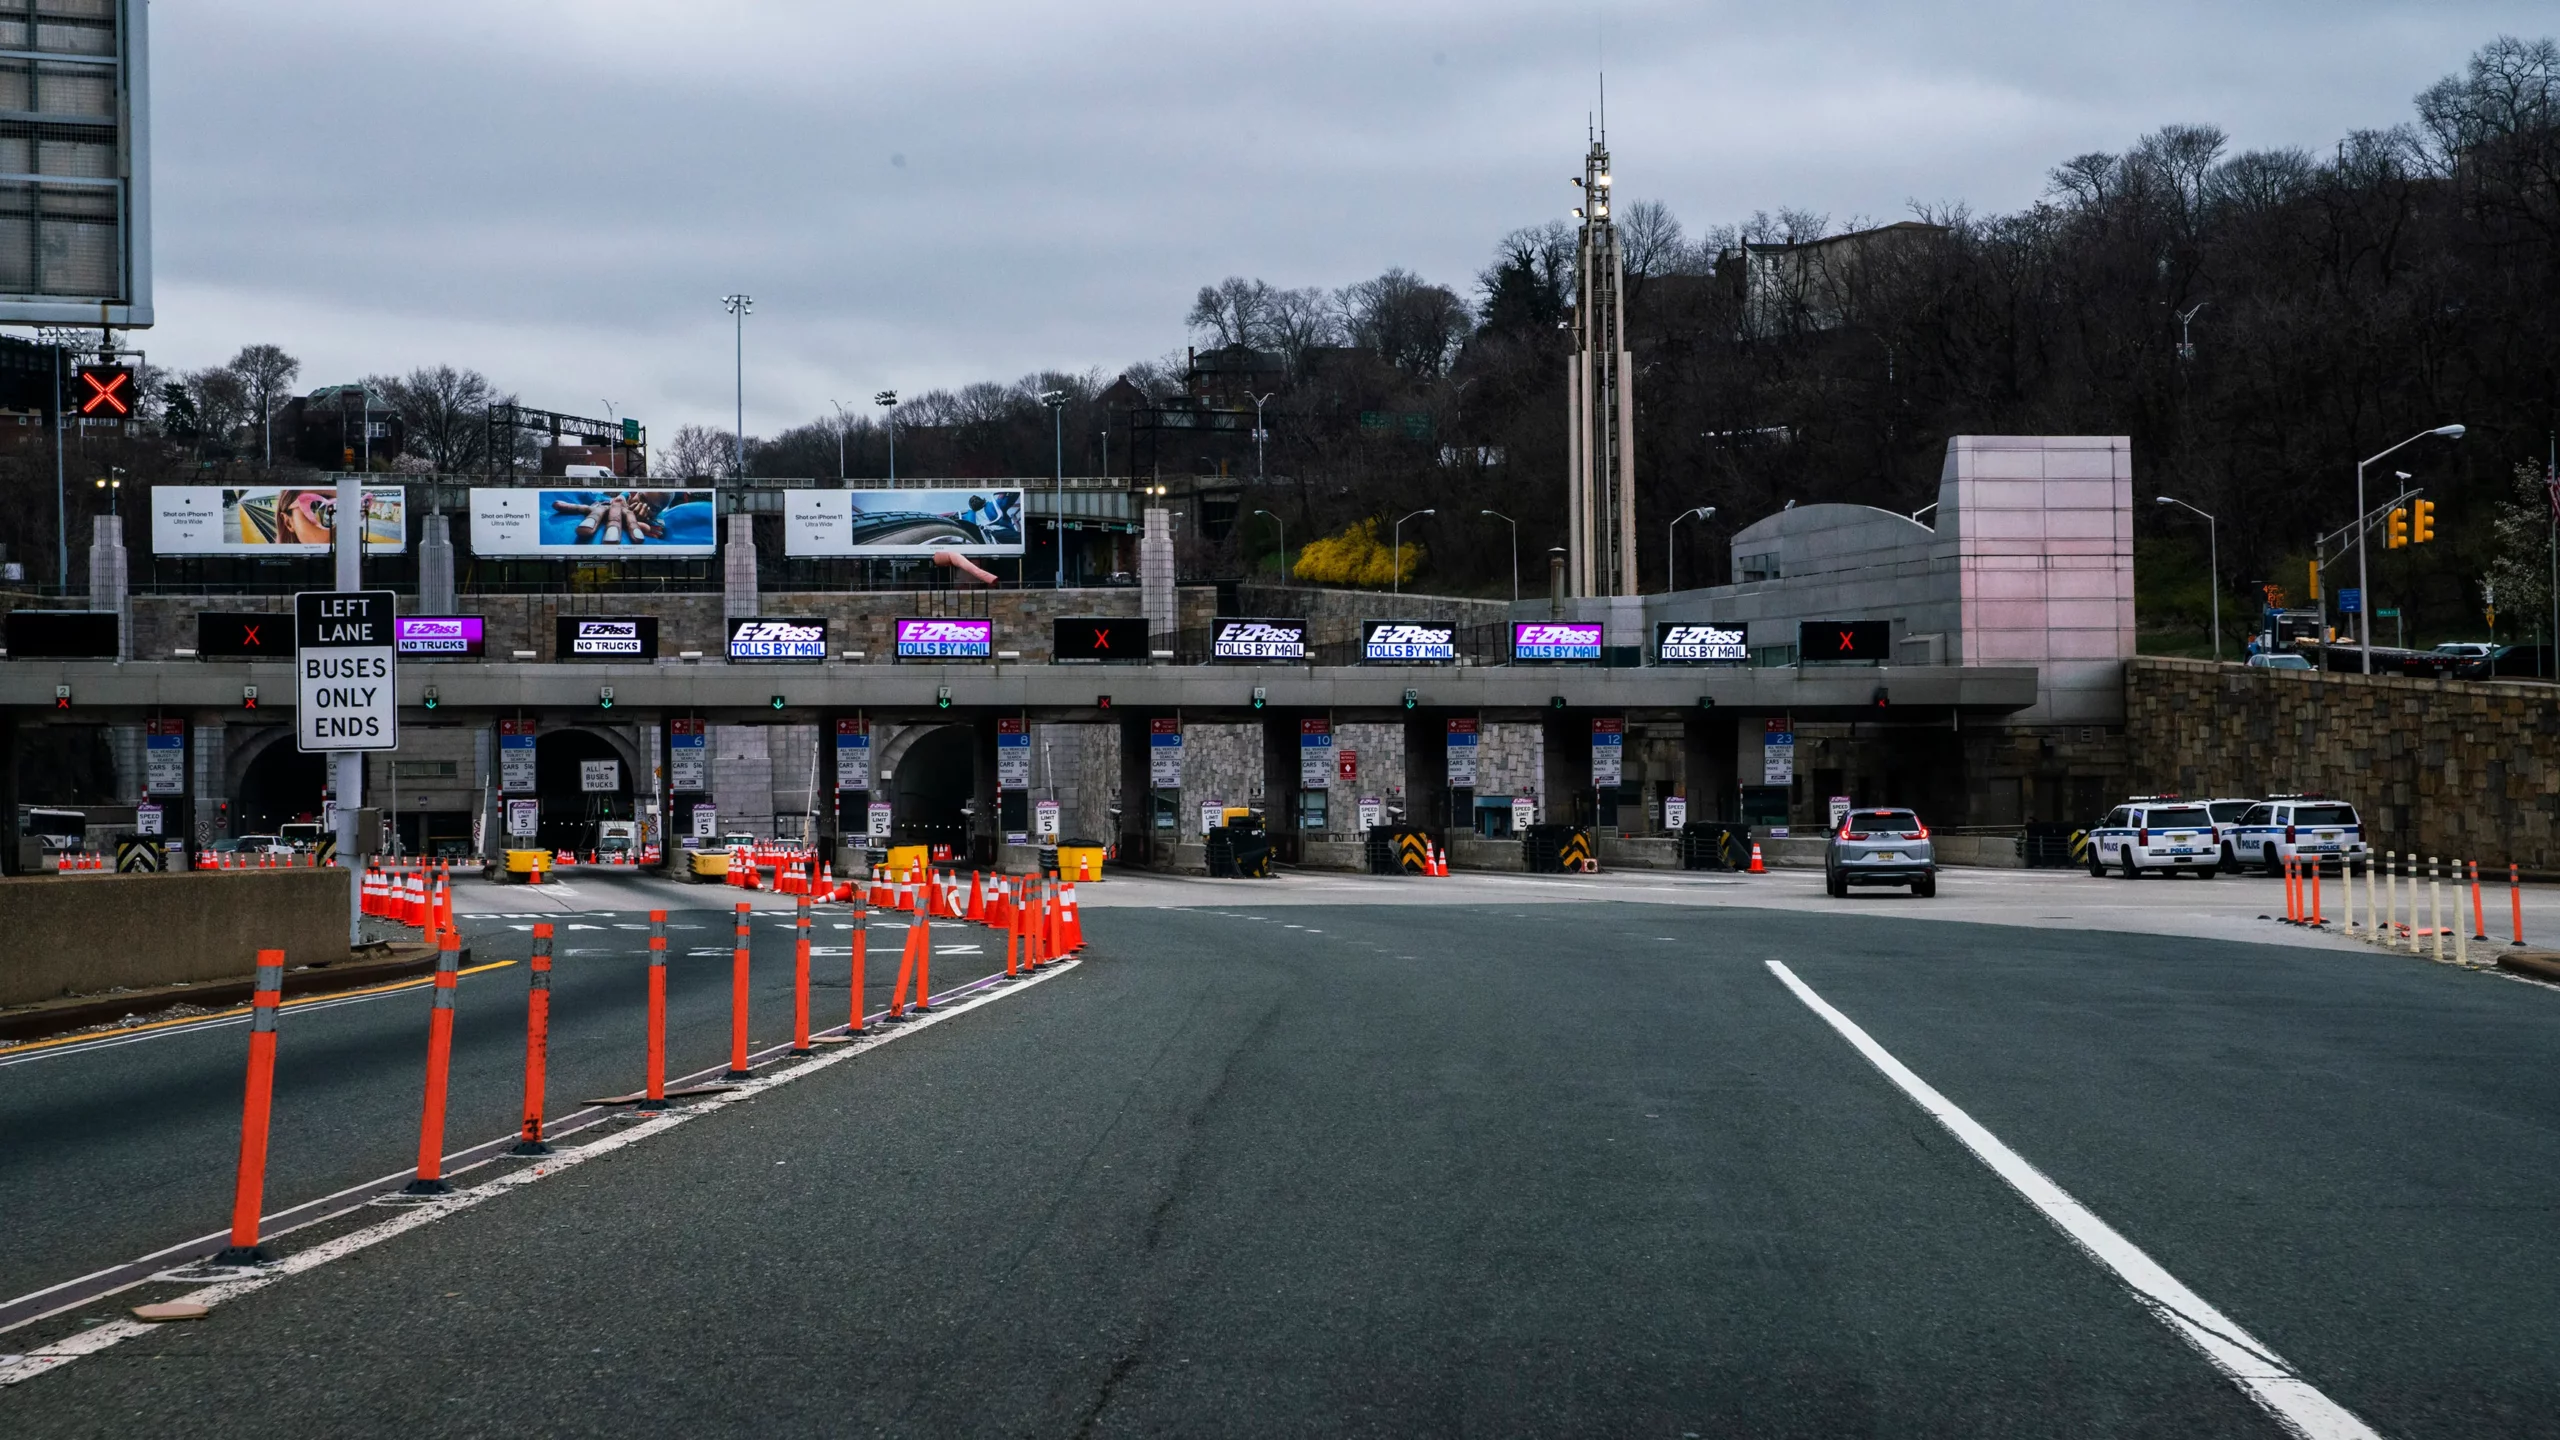 Port Authority approves higher toll increases on SI bridges in 2023